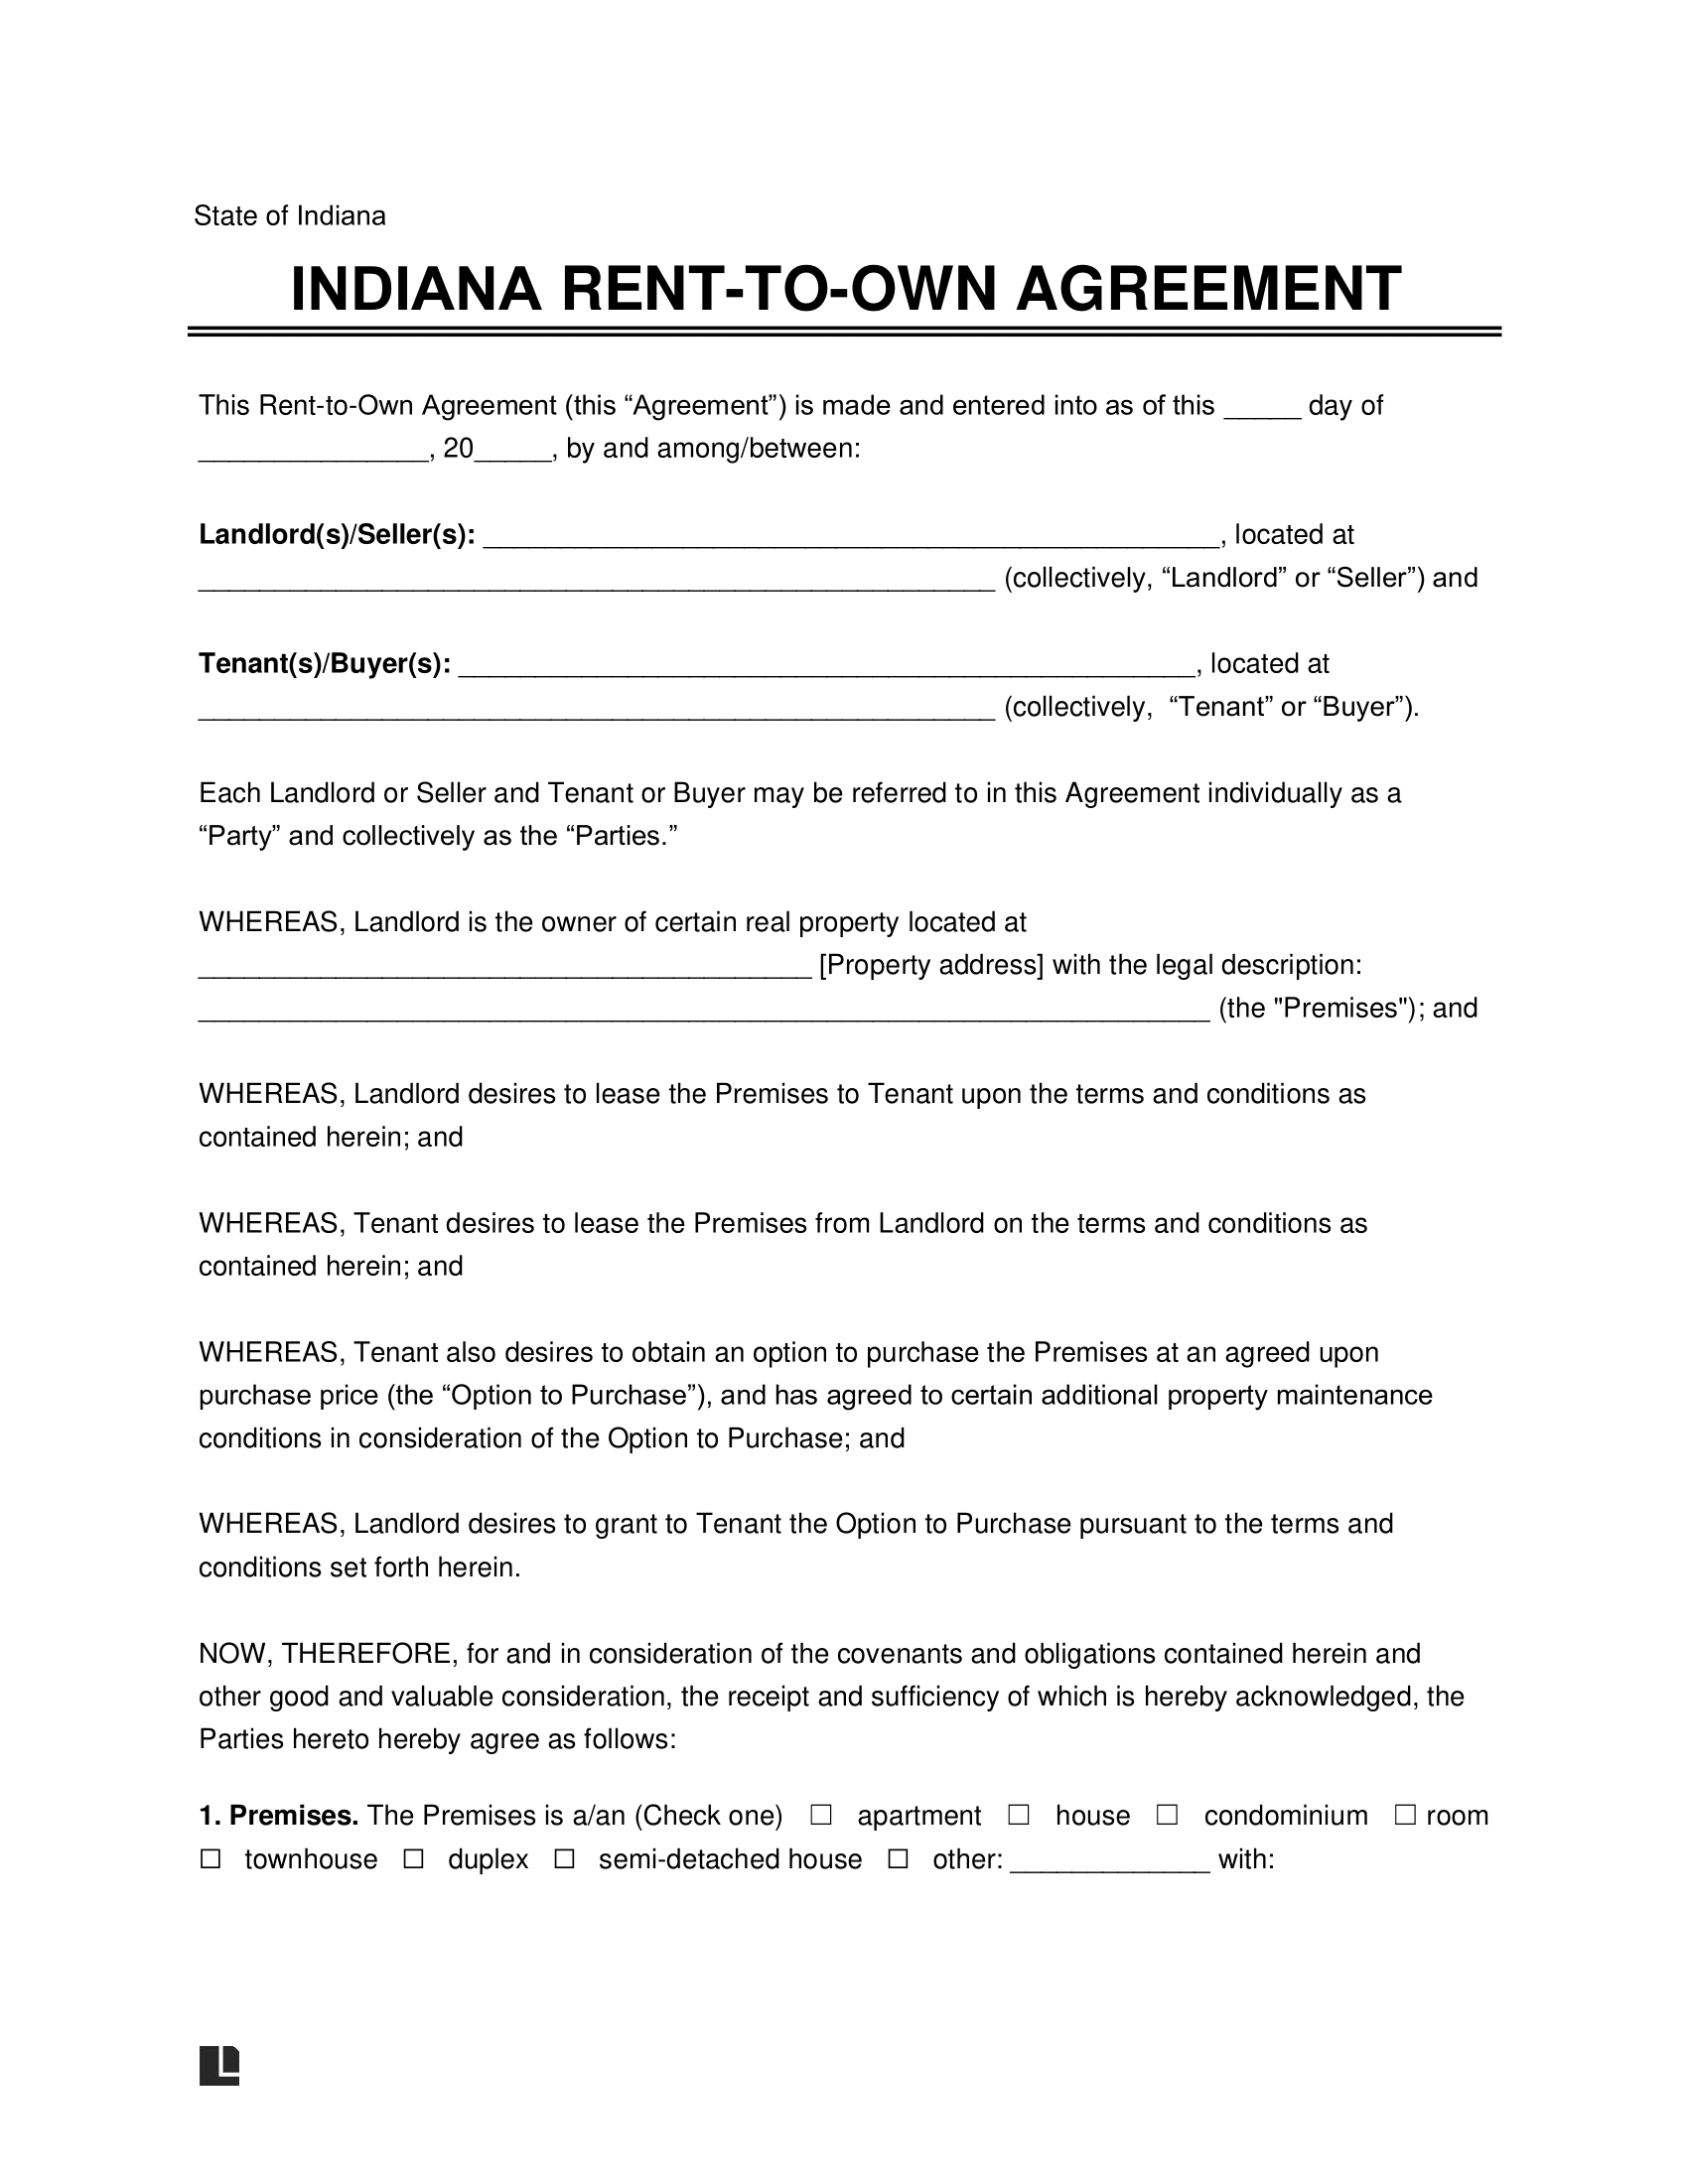 Indiana Lease-to-Own Option-to-Purchase Agreement